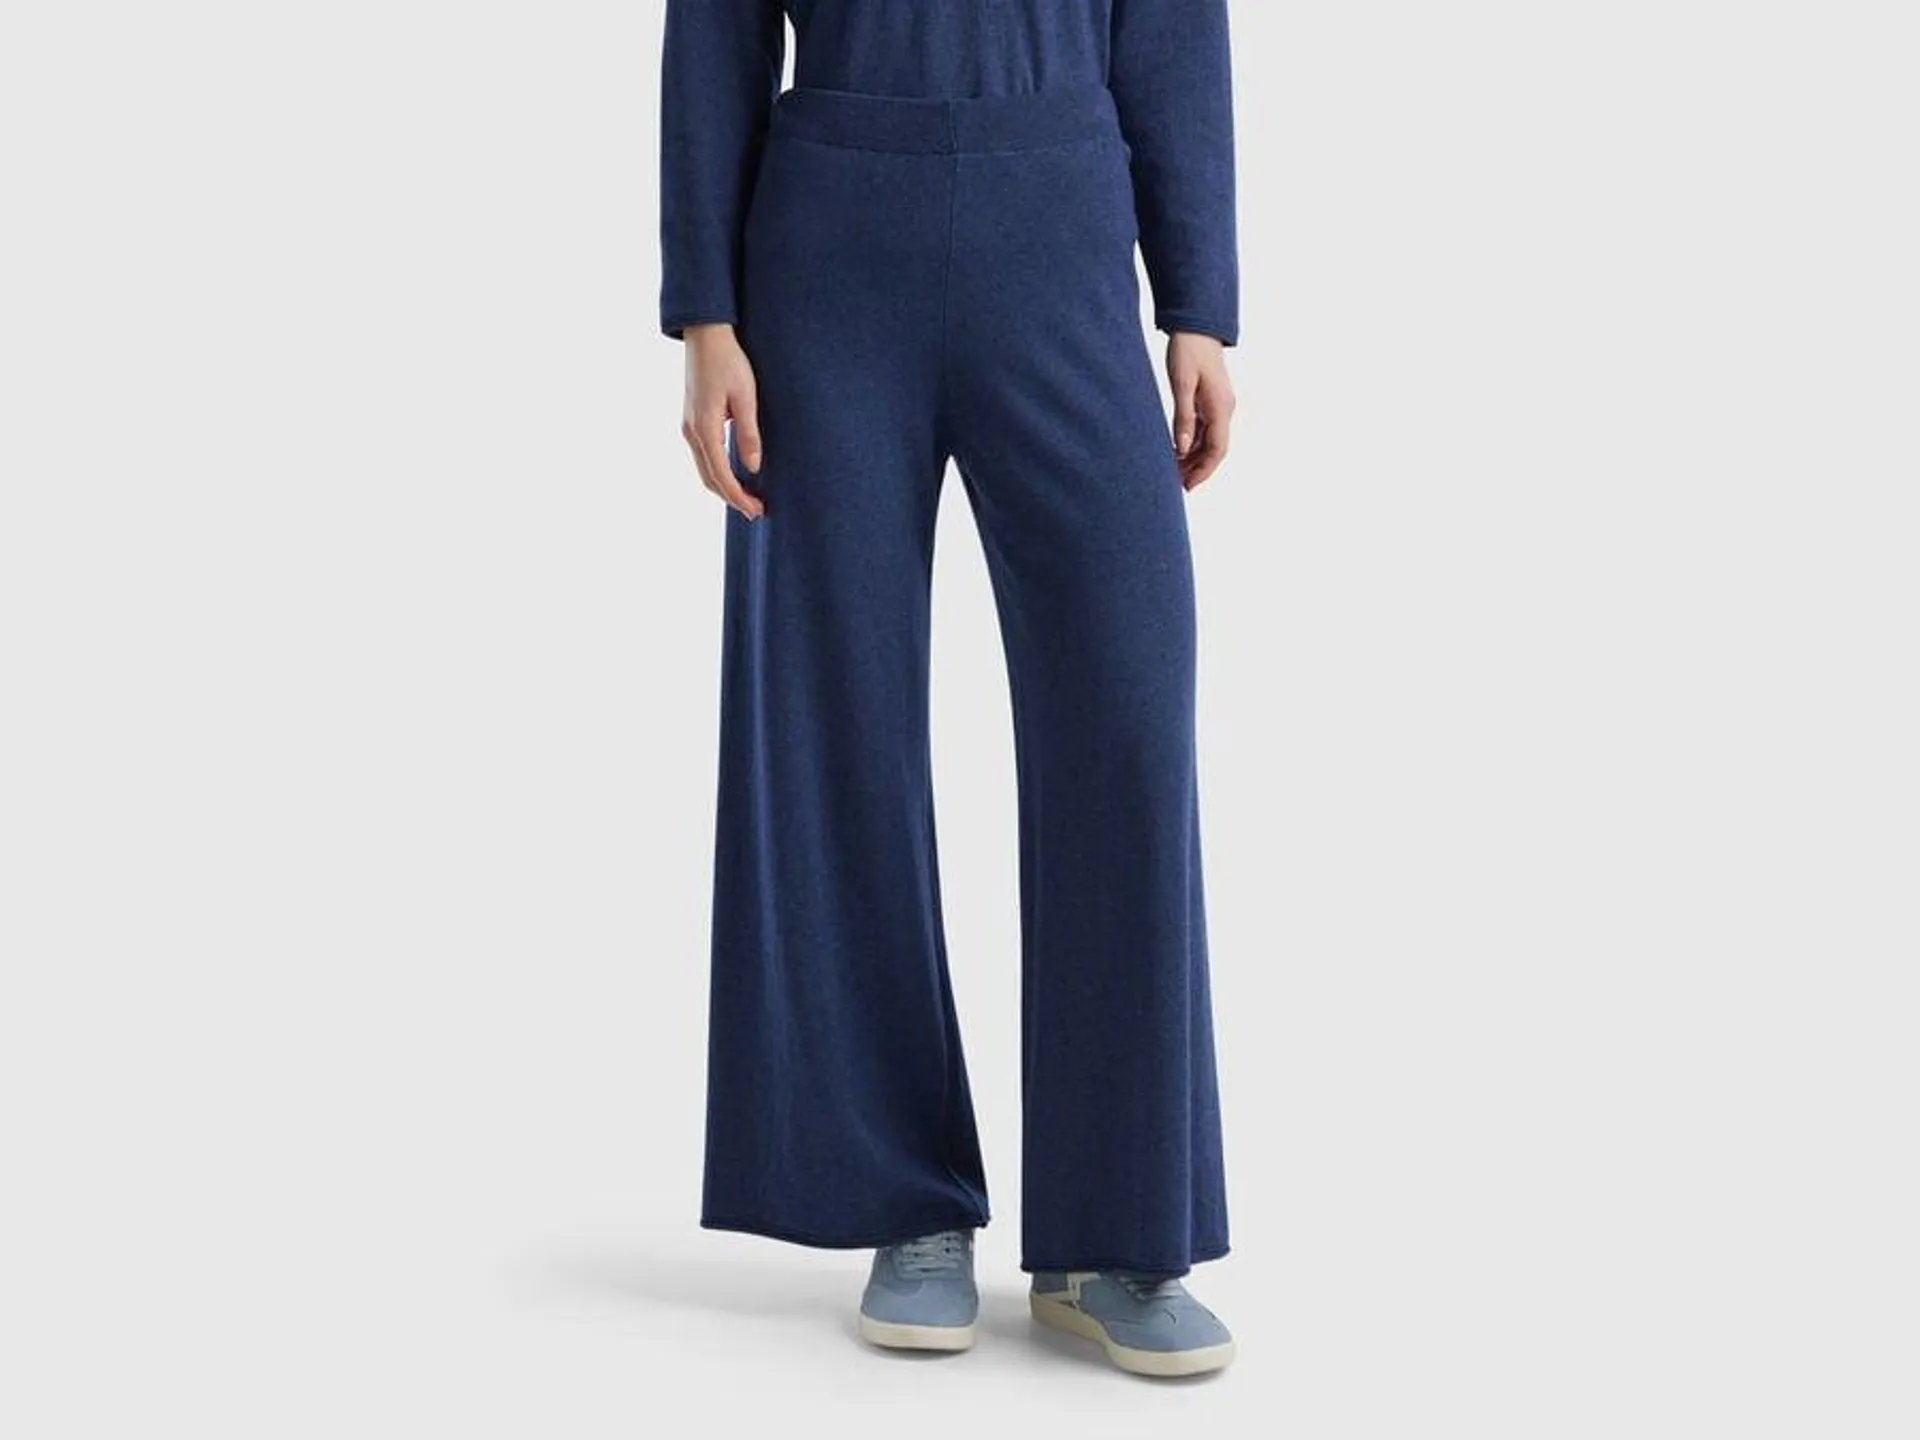 Air force blue wide trousers in cashmere and wool blend